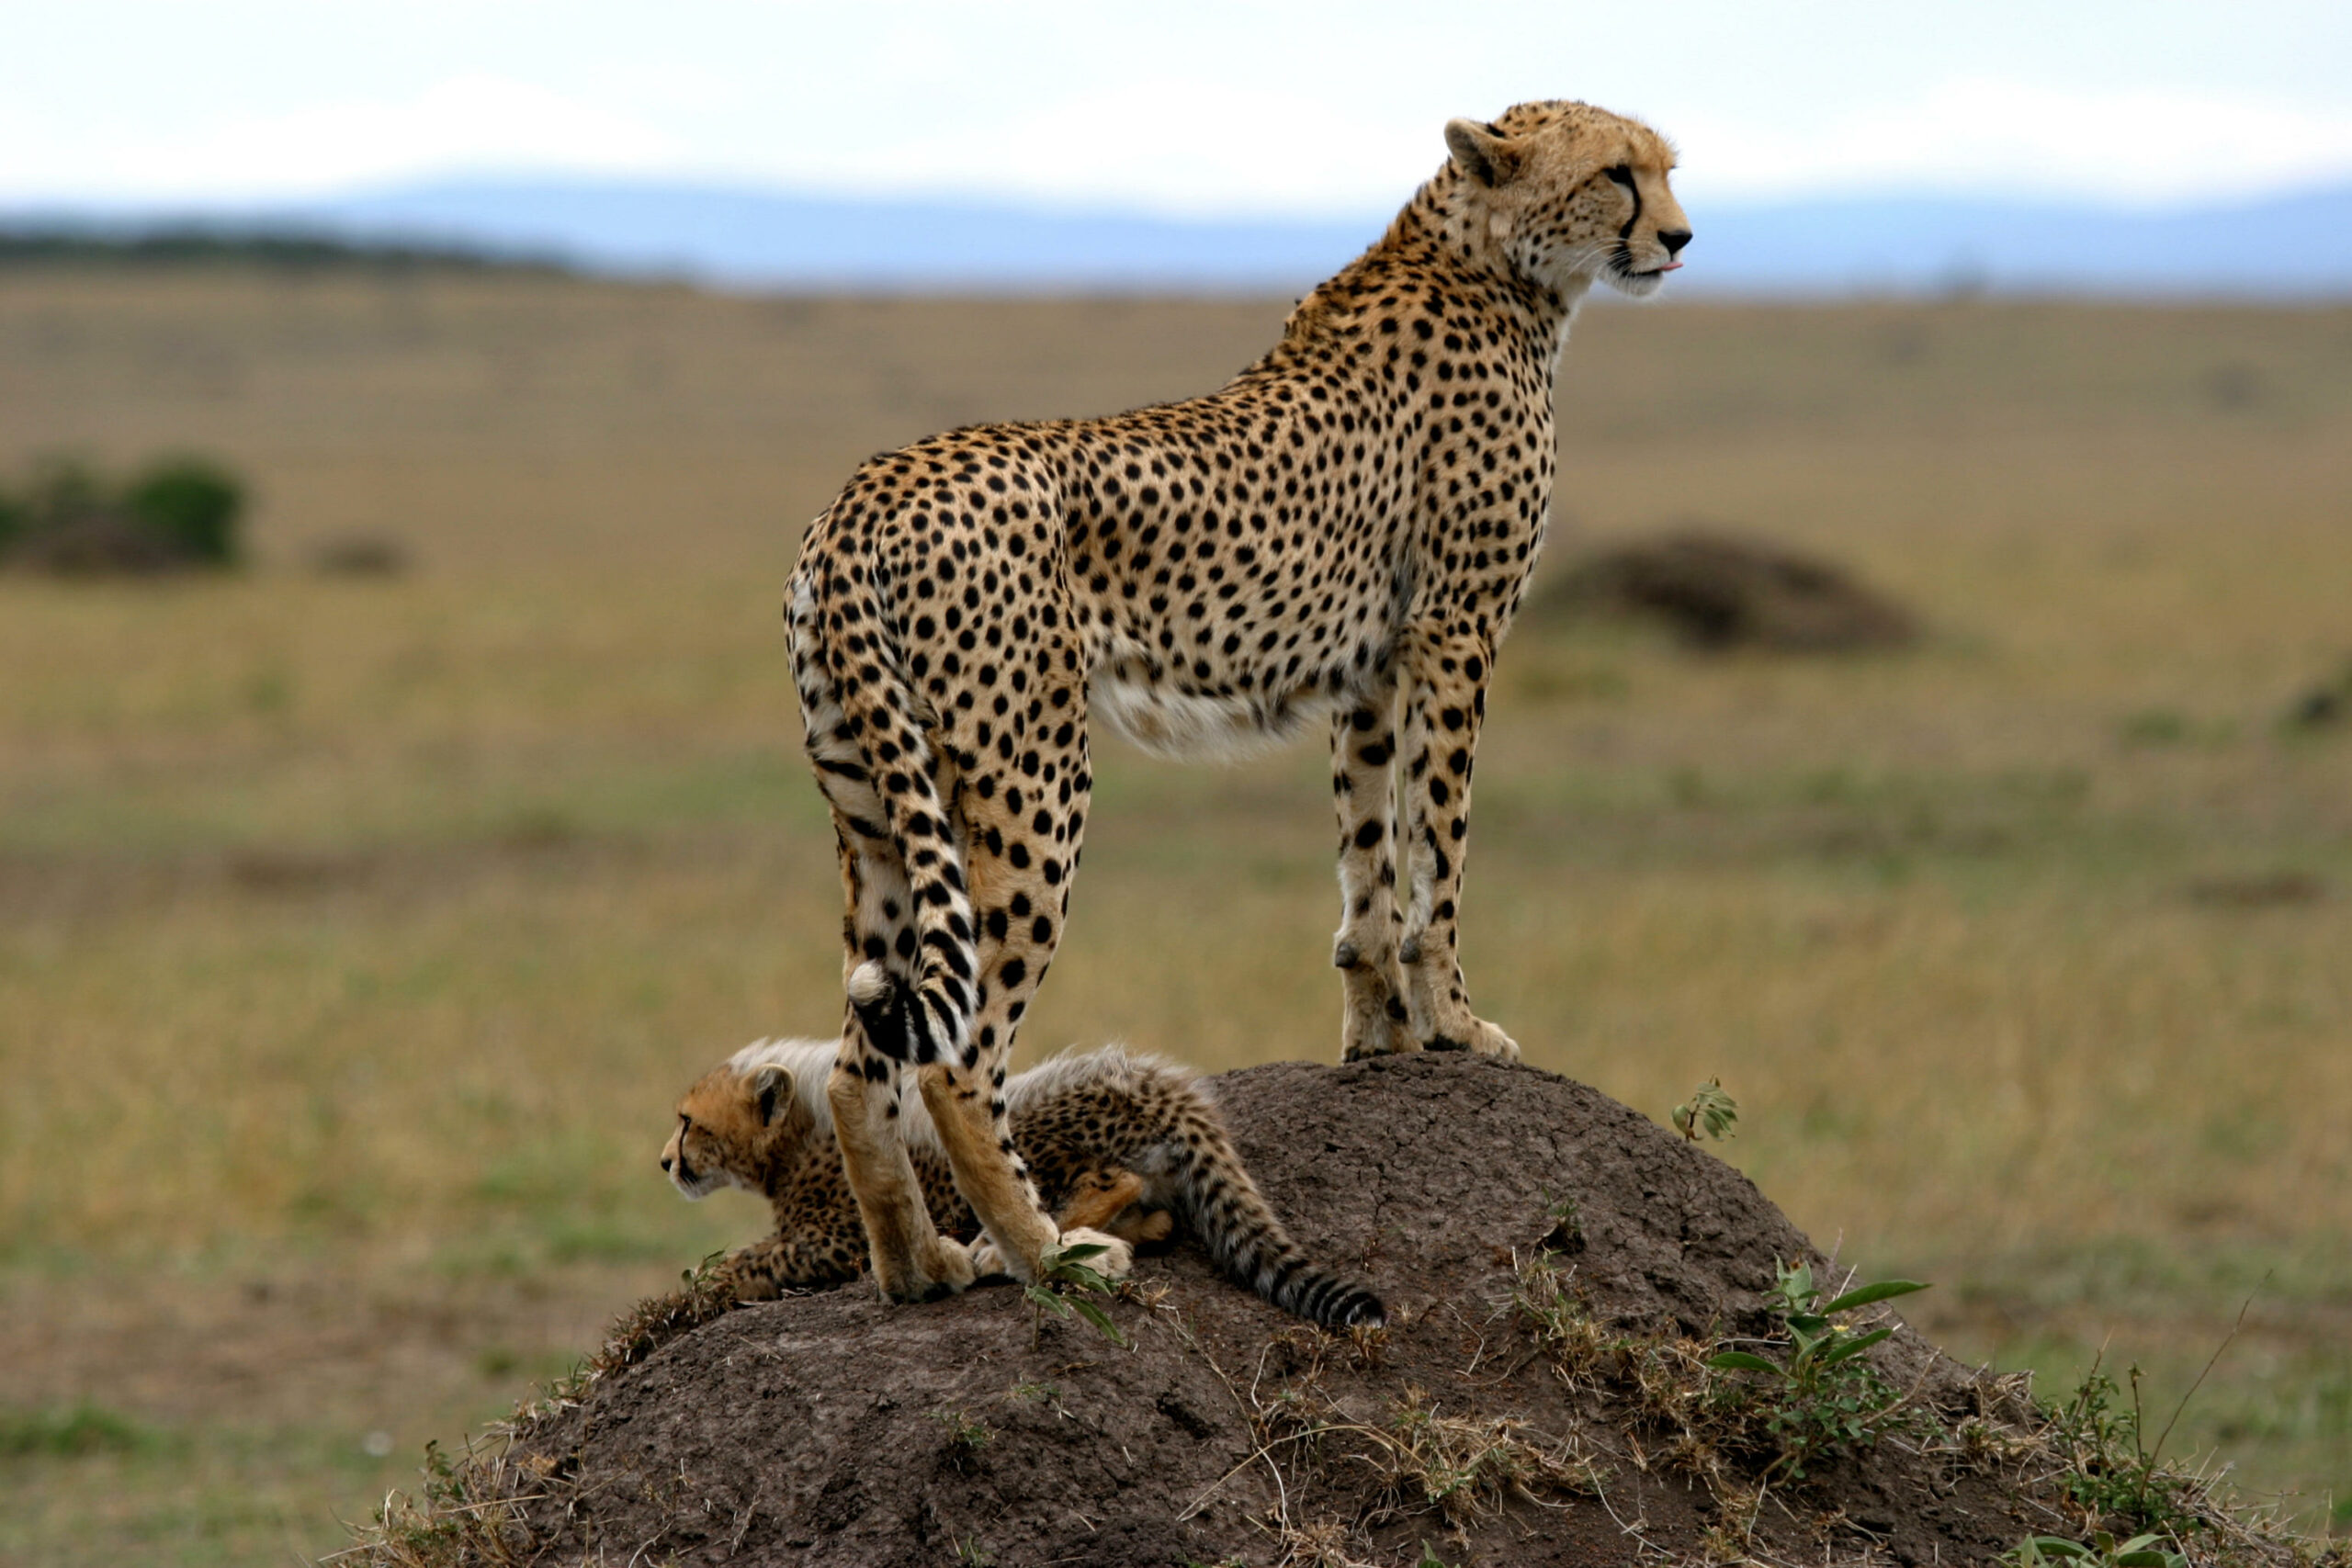 a cheetah standing on top of a mound of dirt.